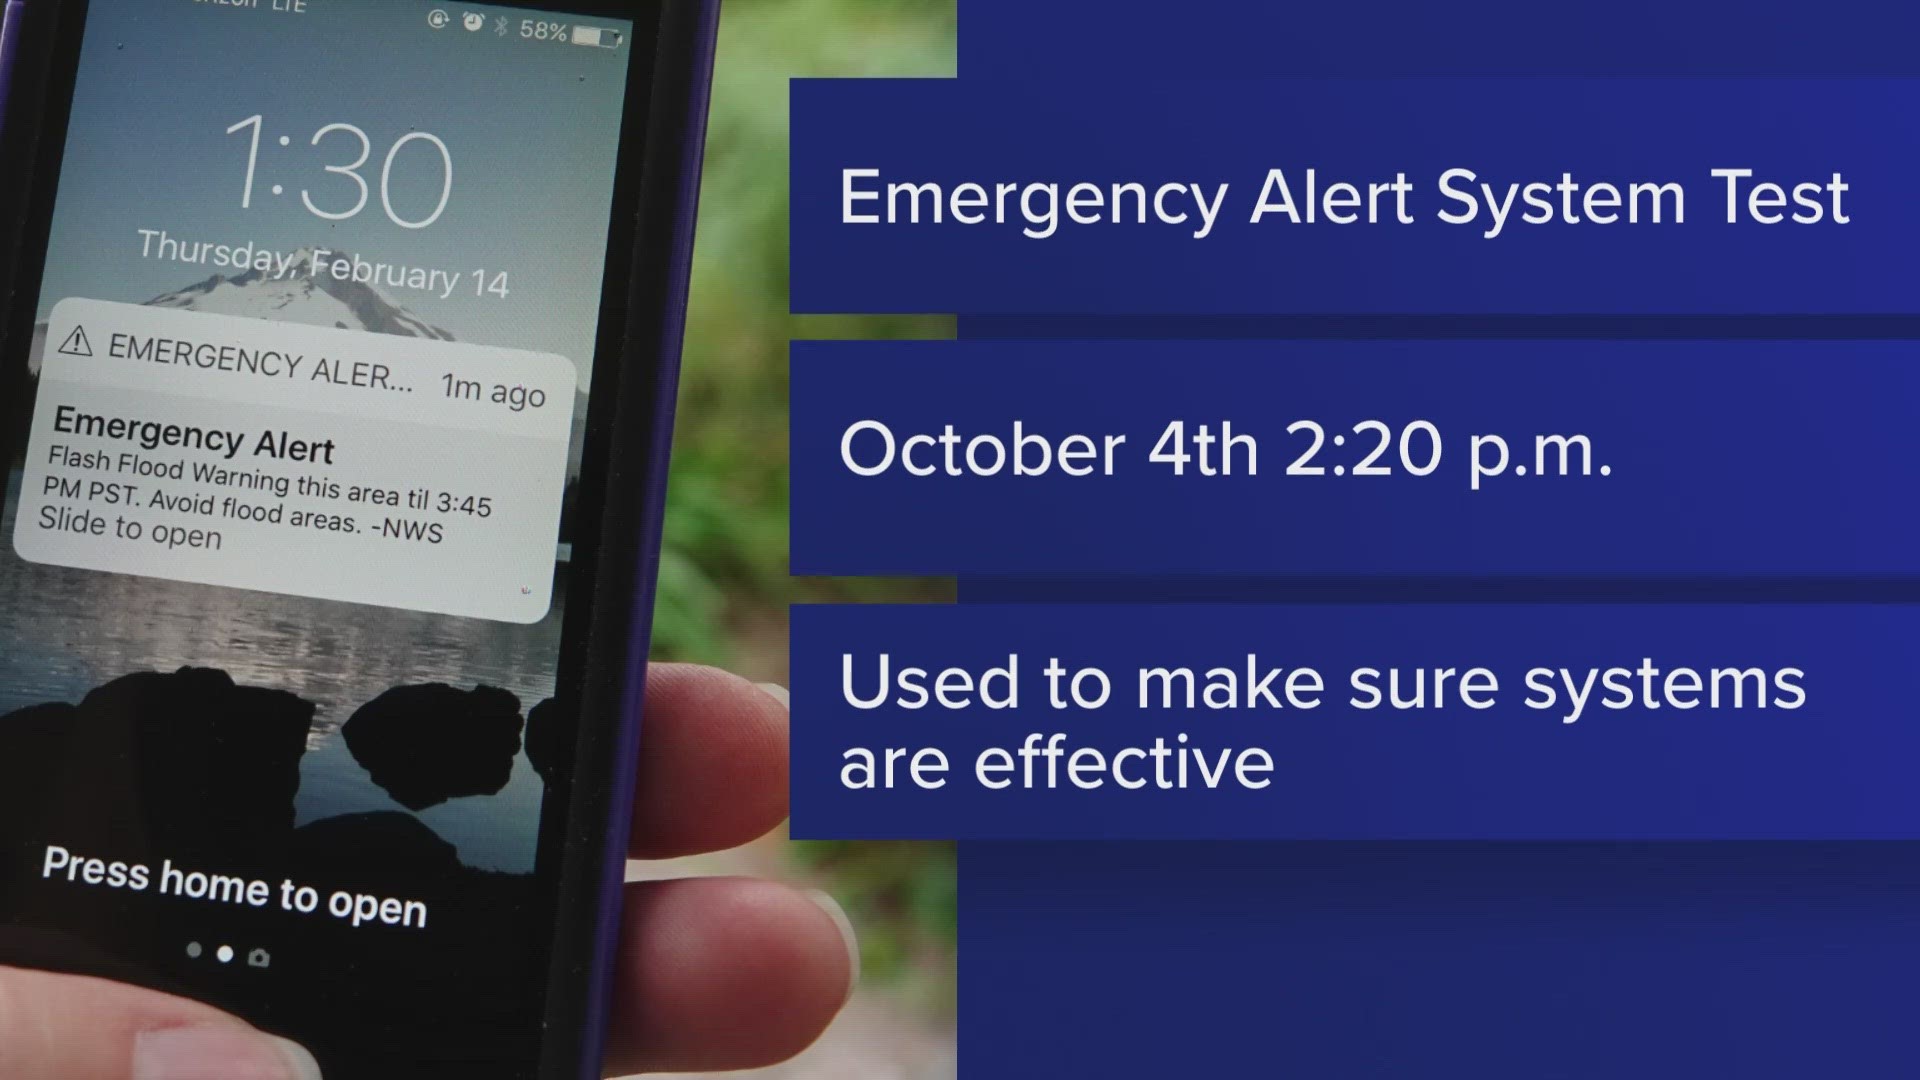 FEMA to Send Emergency Alert TEST to ALL TVs, Radios and Cell Phones Oct.  4th